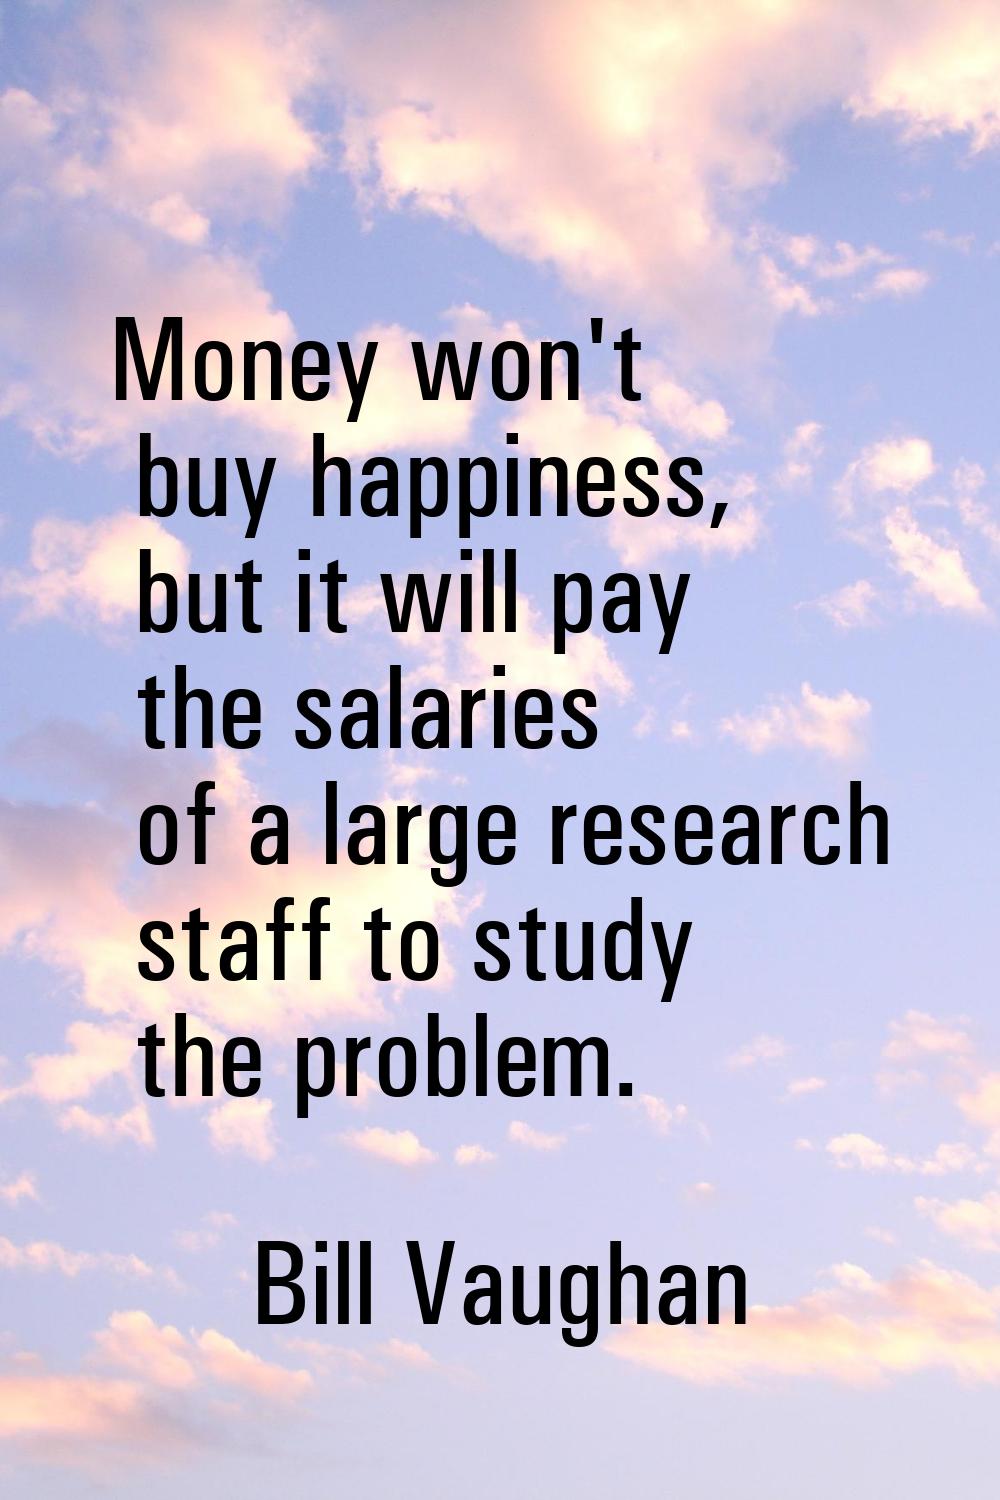 Money won't buy happiness, but it will pay the salaries of a large research staff to study the prob